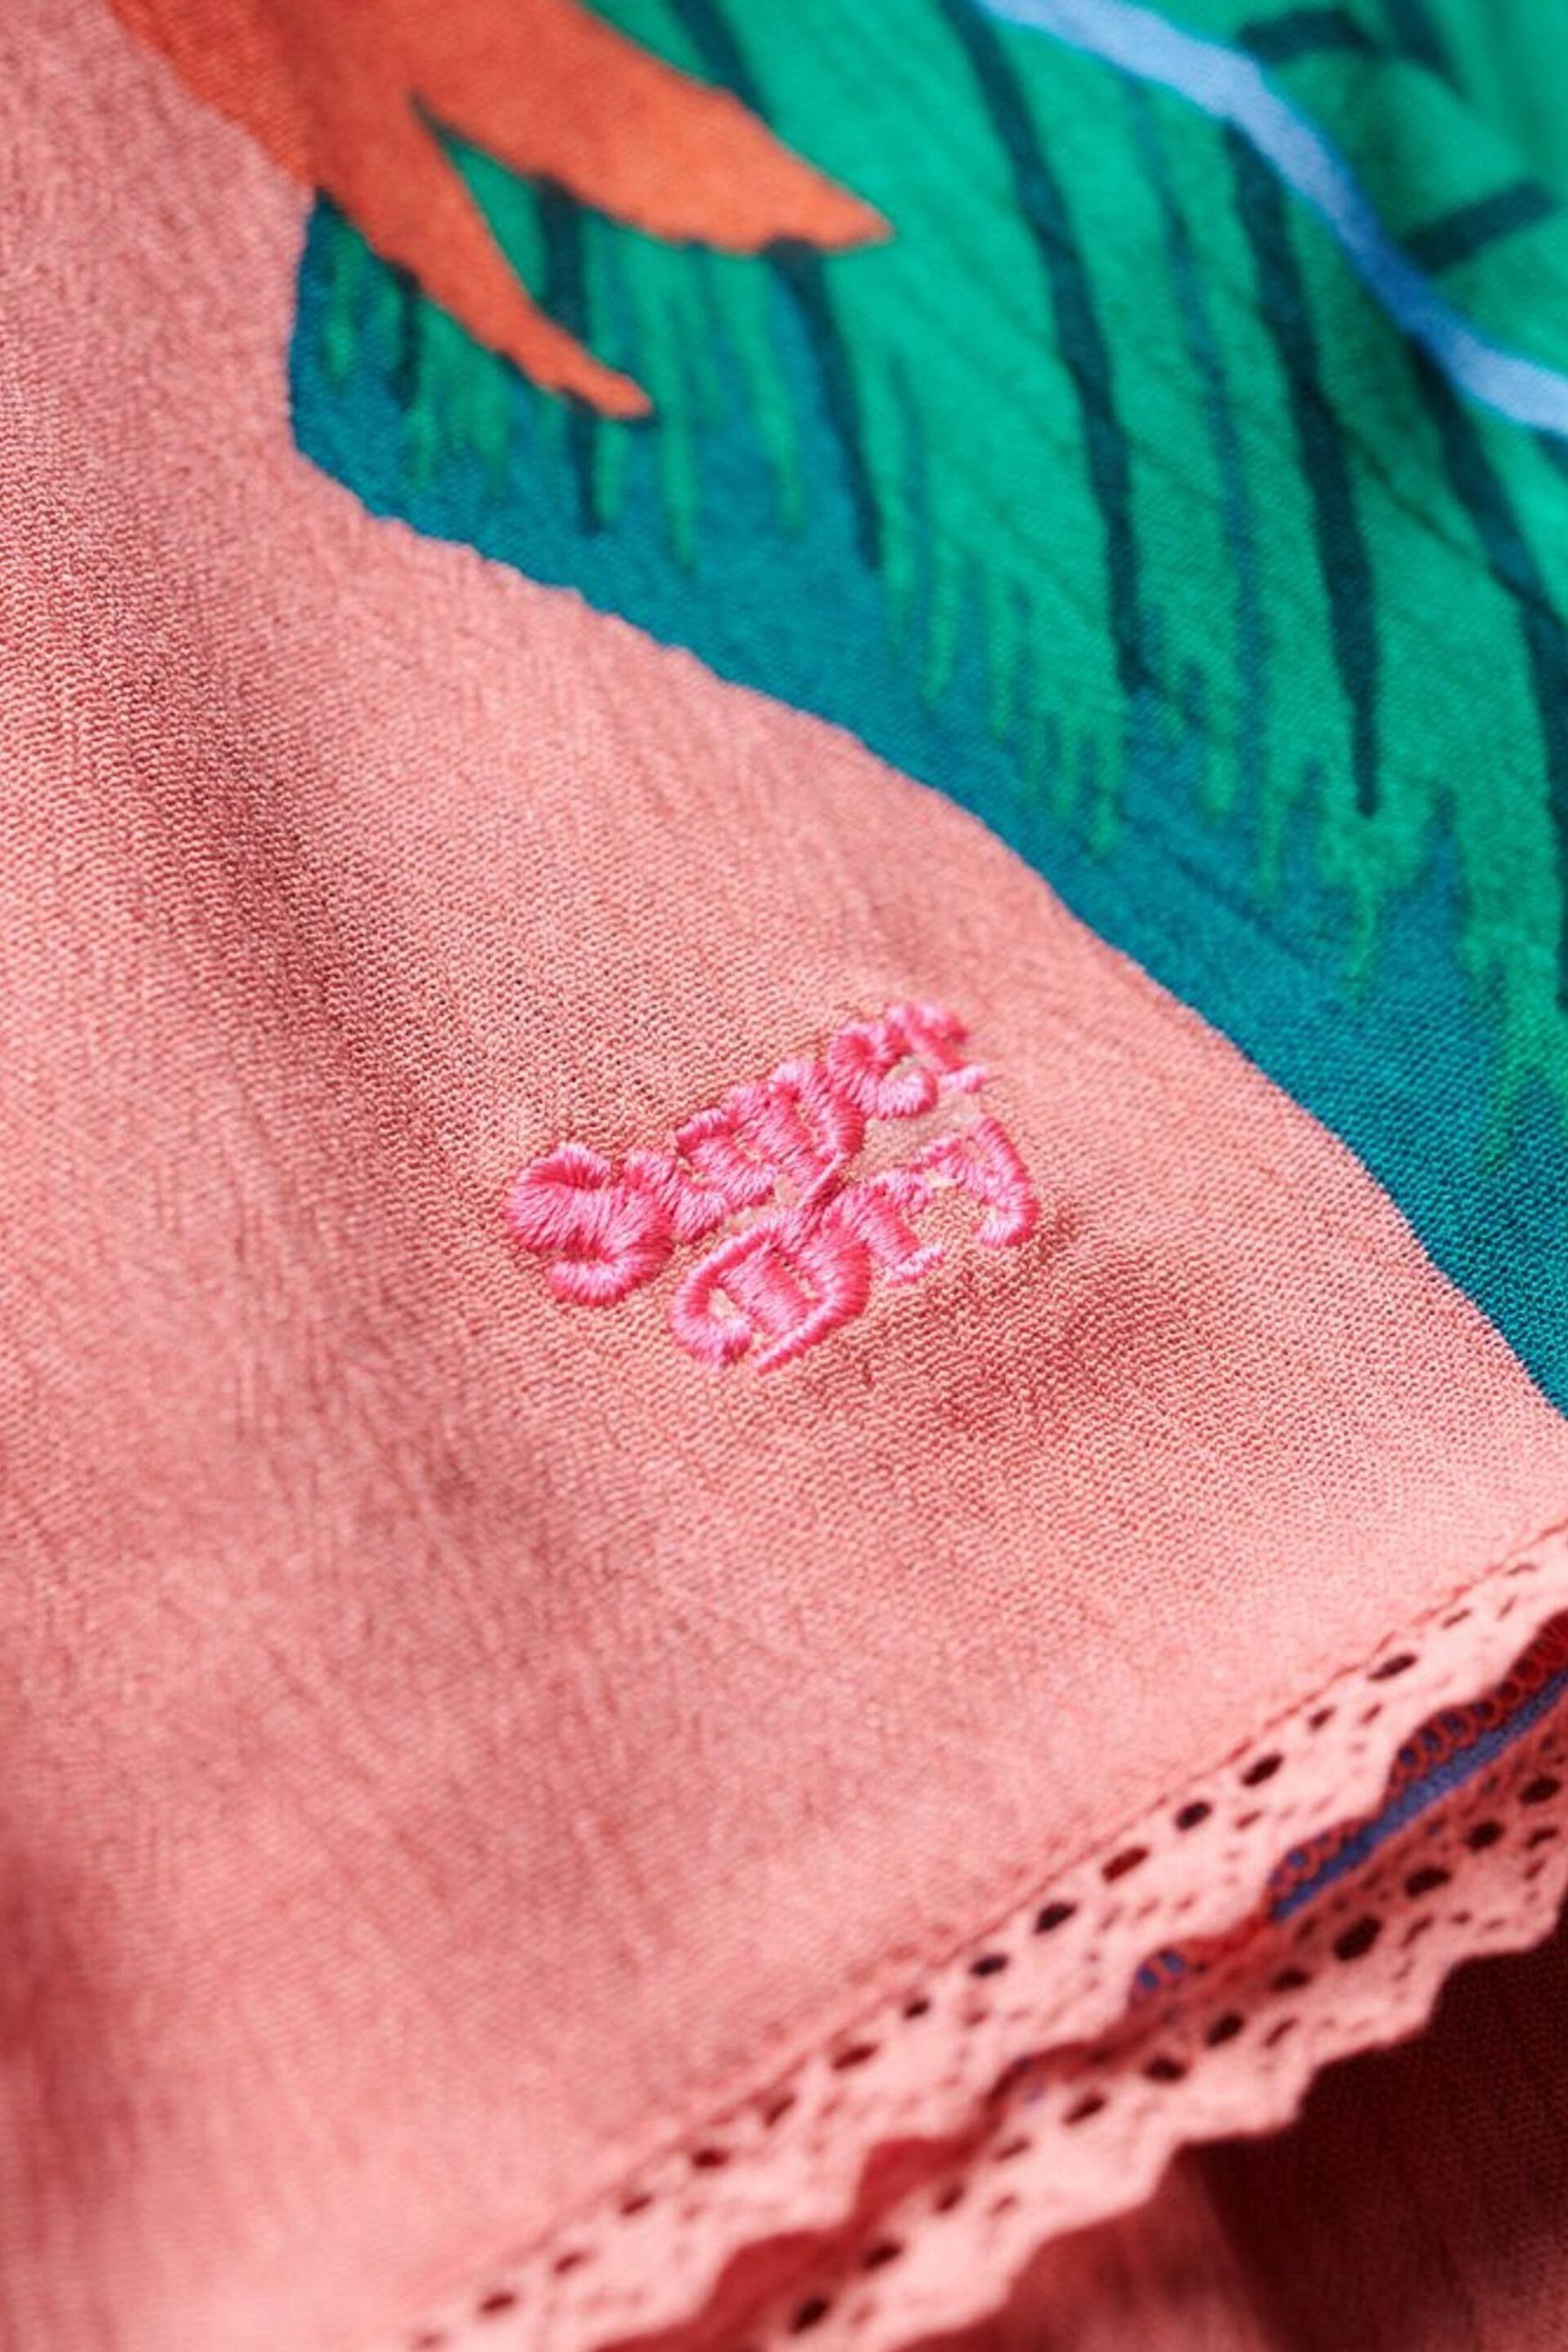 Superdry Pink Beach Shorts - Image 7 of 7